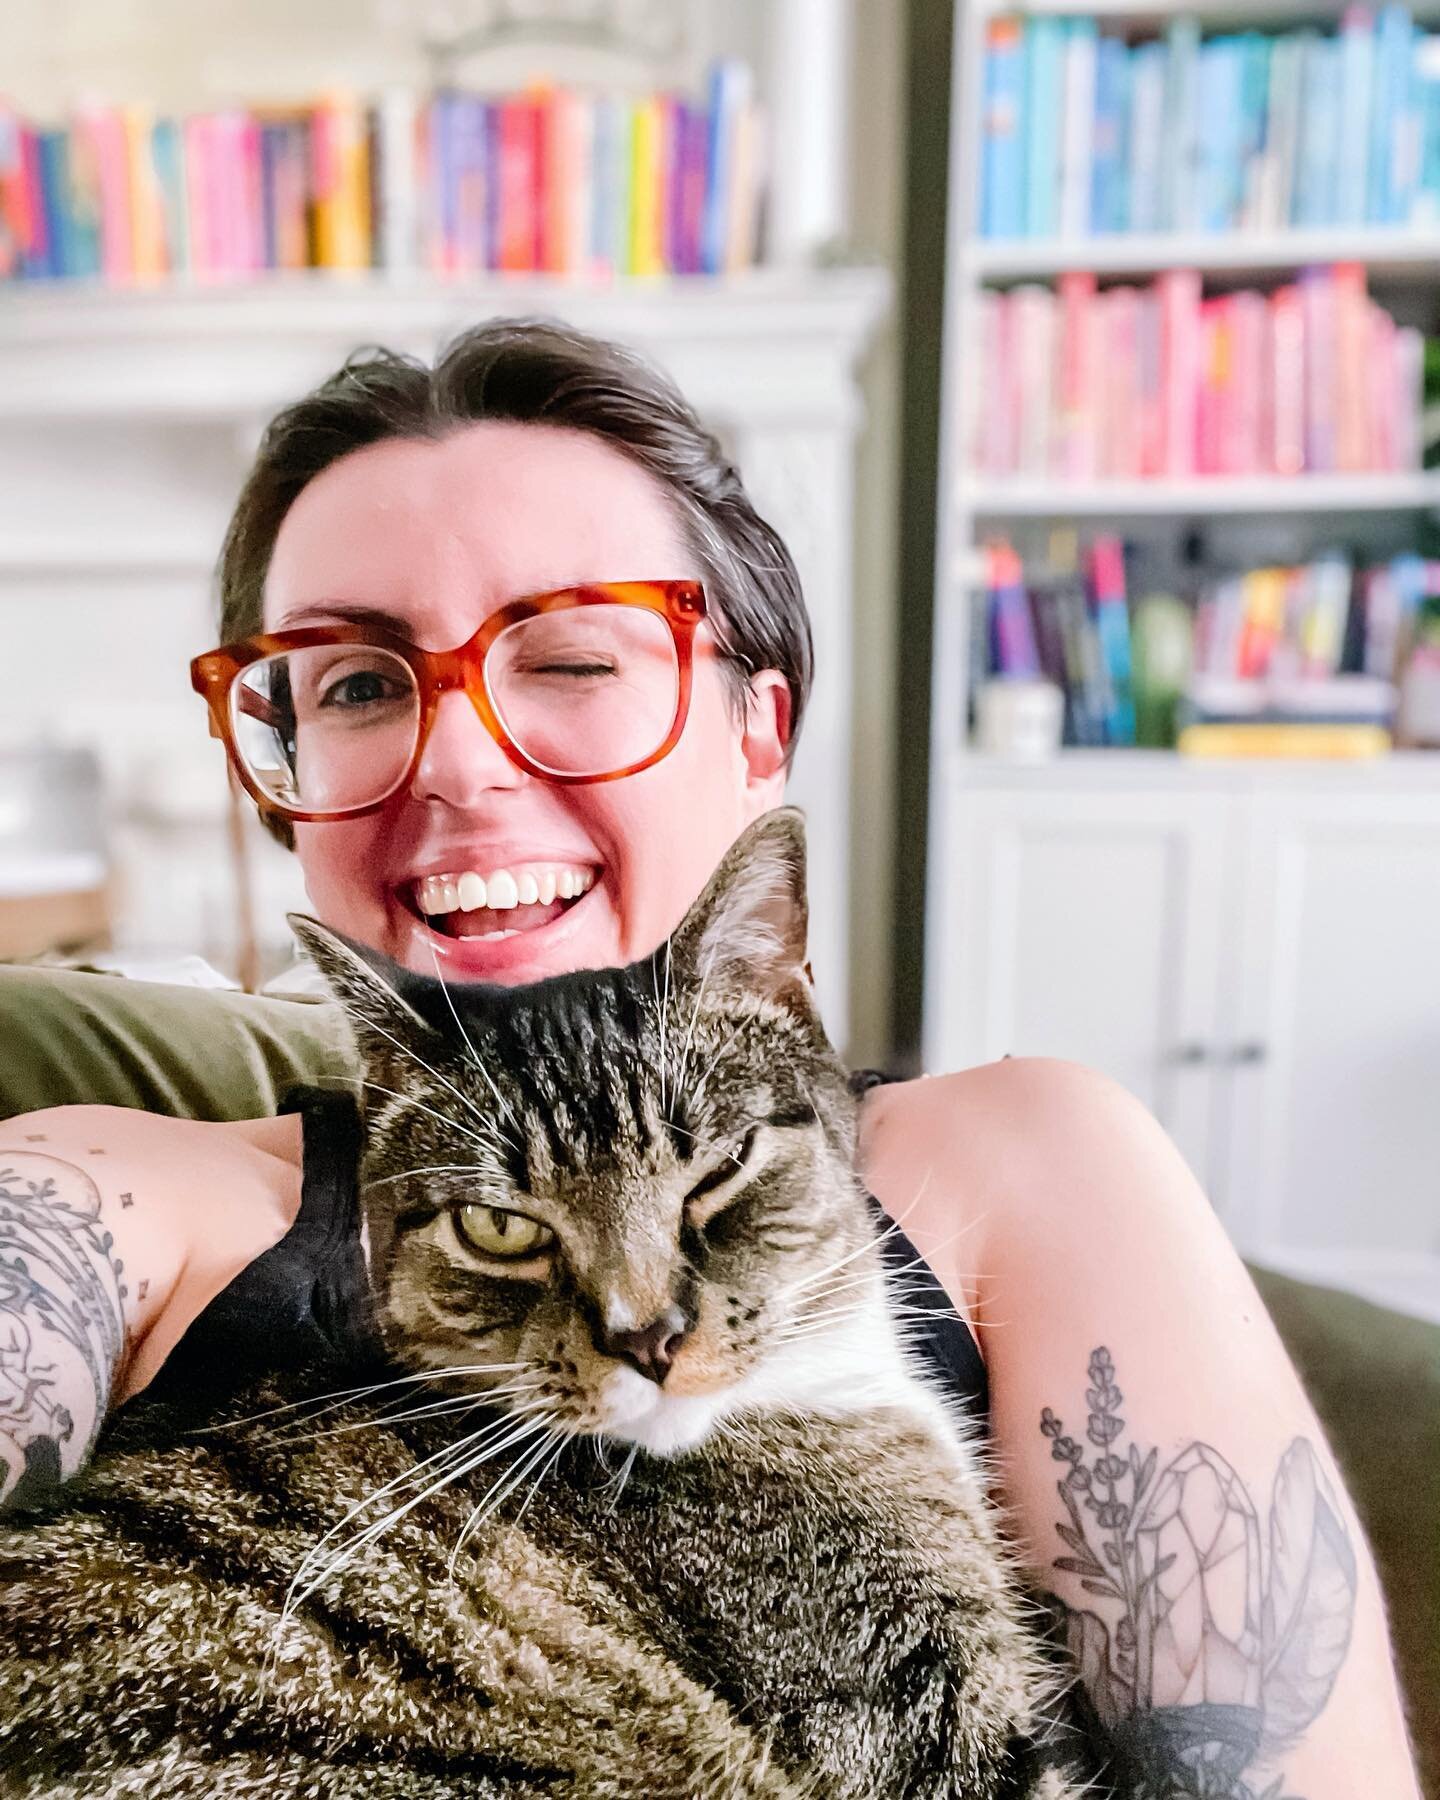 harry and i are winking because something very cool has landed in my inbox and we are being vague about it for secret publishing reasons but we are EXCITED.